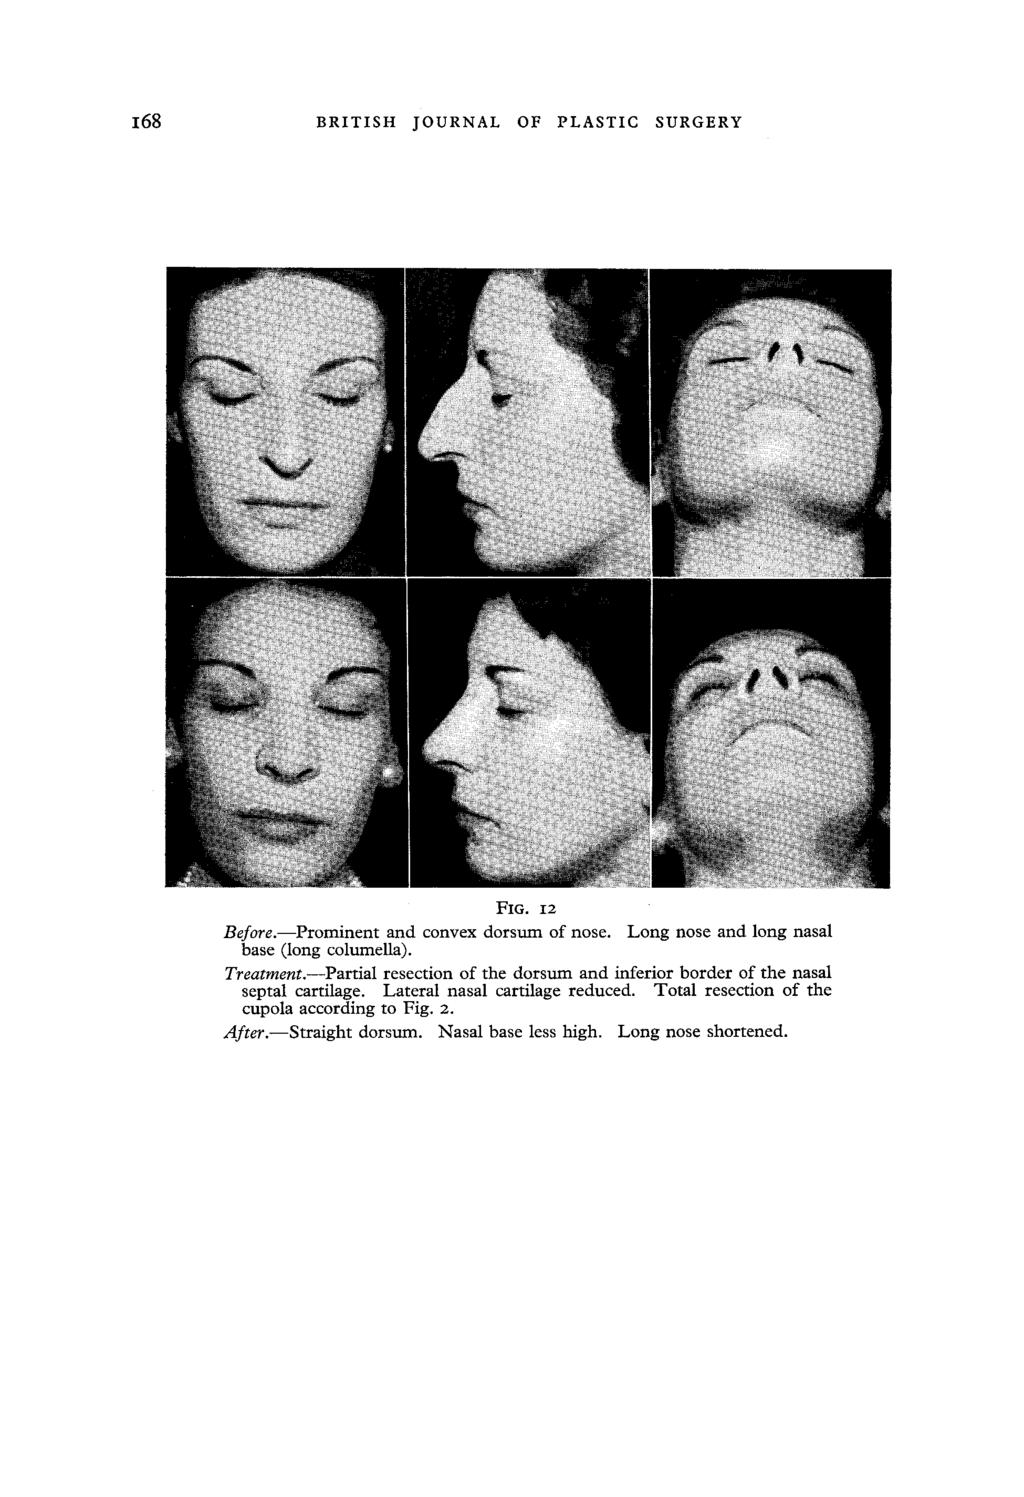 168 BRITISH JOURNAL OF PLASTIC SURGERY FIG. I2 Before.--Prominent and convex dorsum of nose.